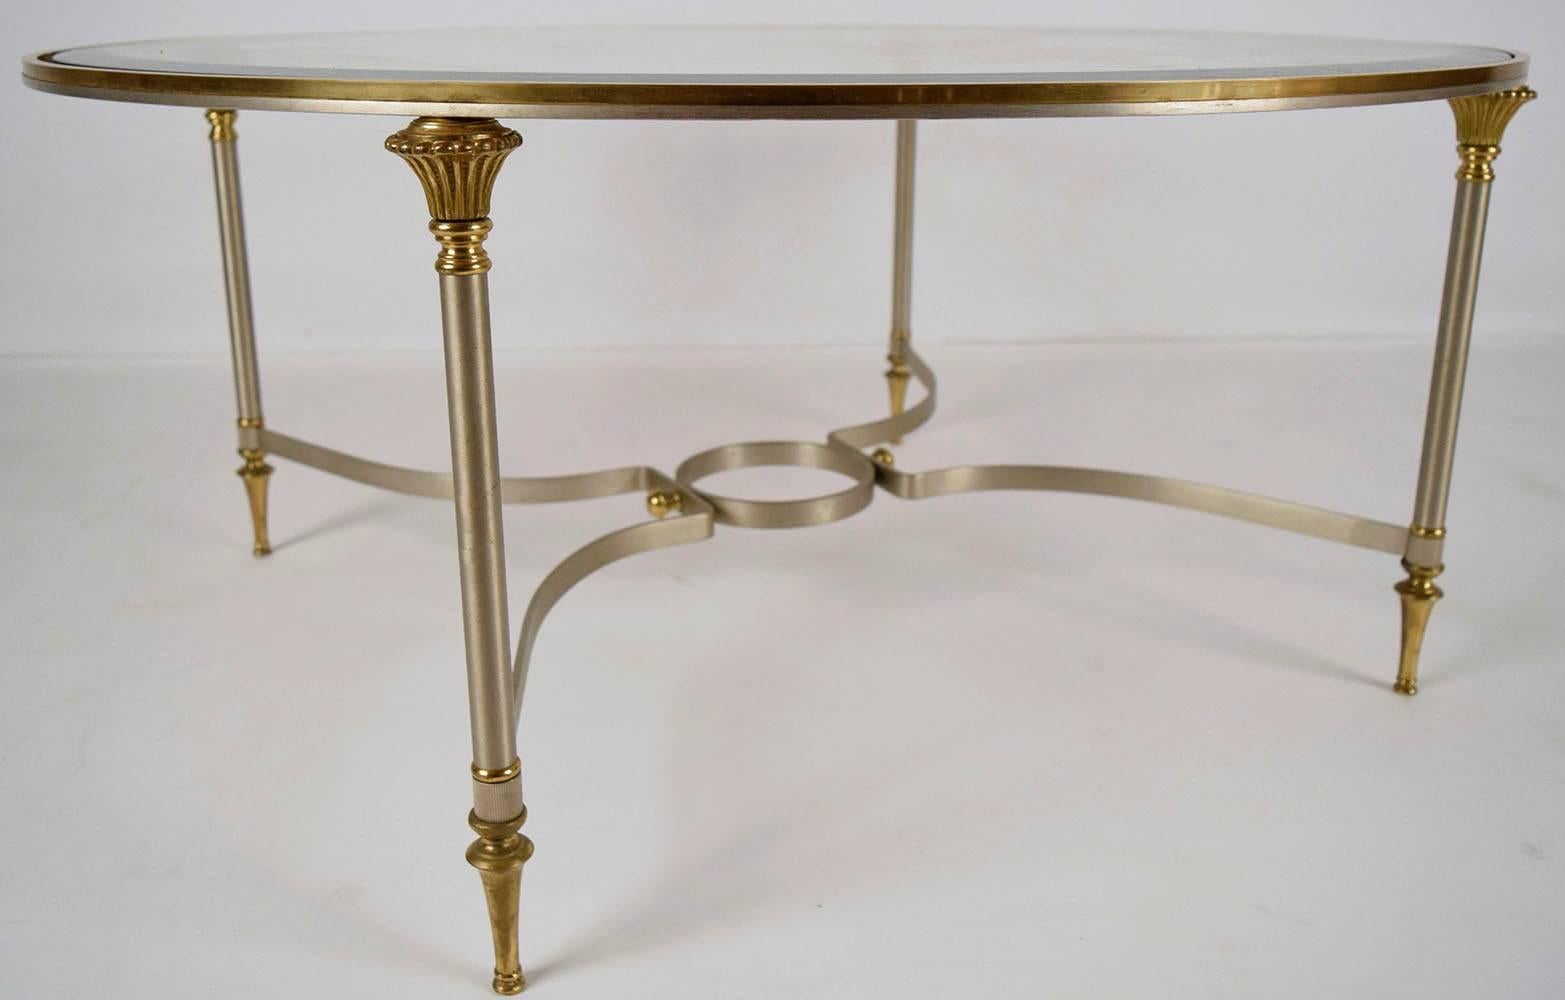 This vintage 1970s Mid-Century circular coffee table features a chrome frame with brass accents on its edges. The 3/8